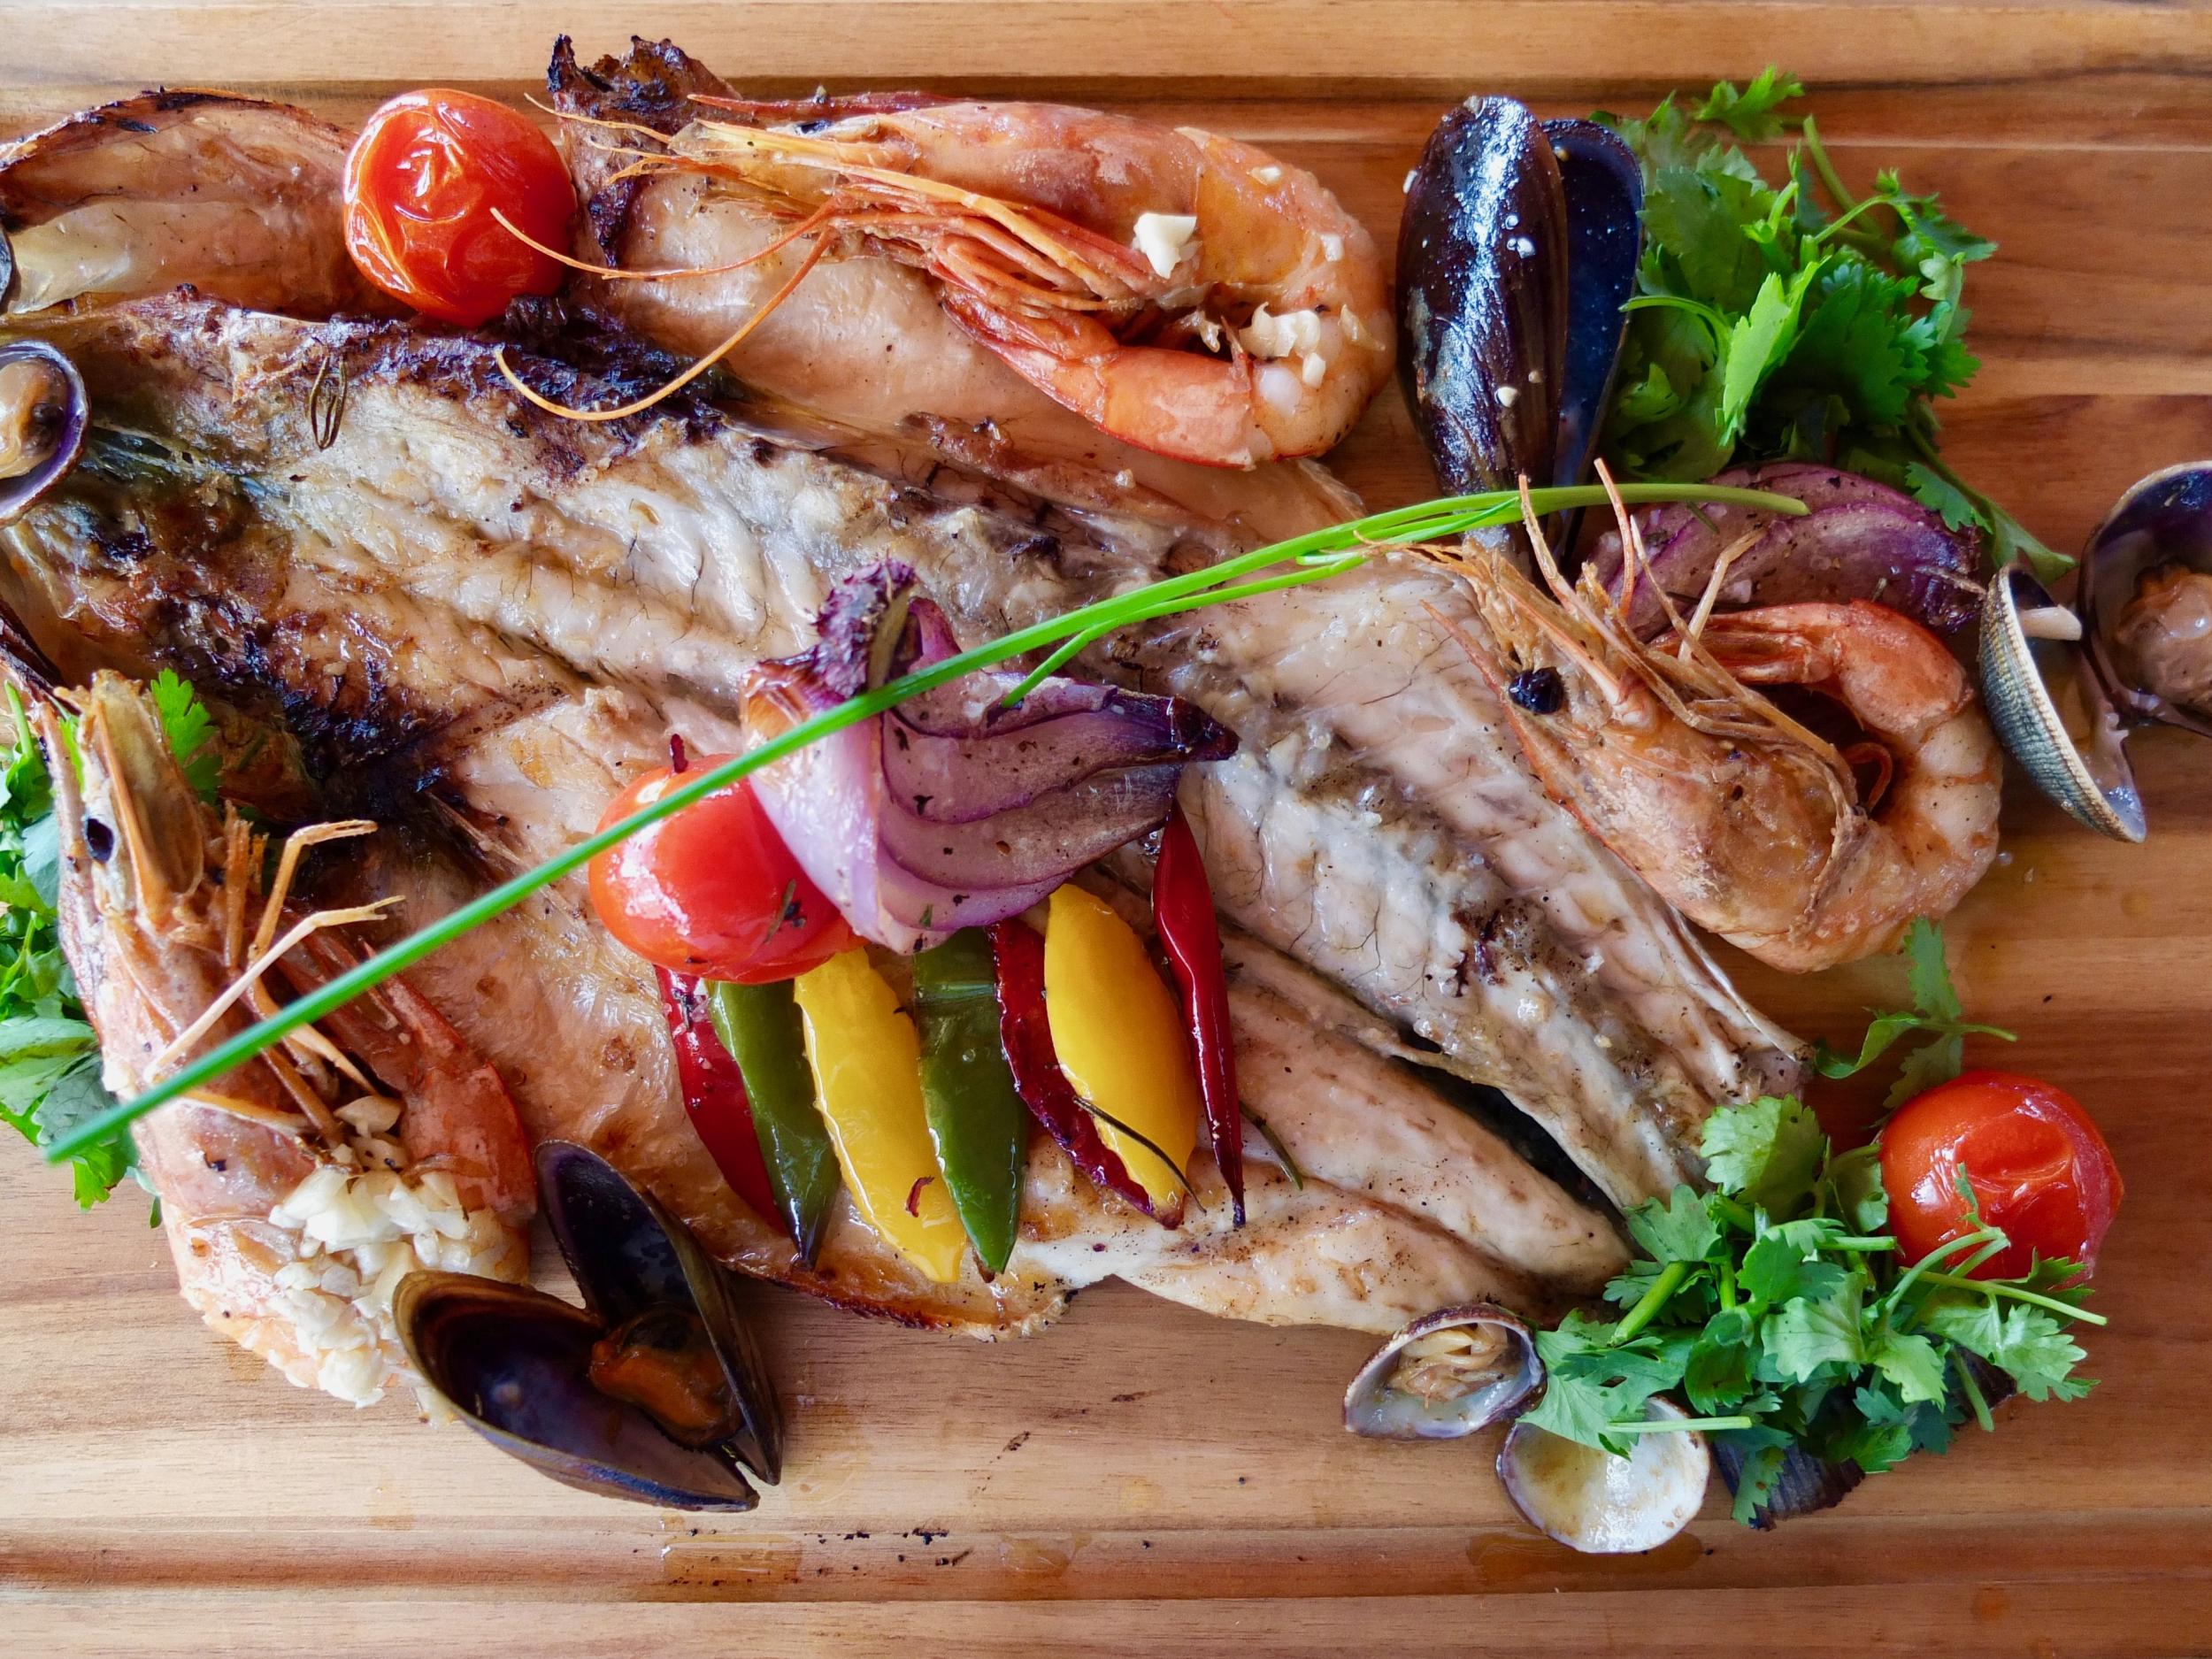 Cafe Comporta is all about fresh seafood